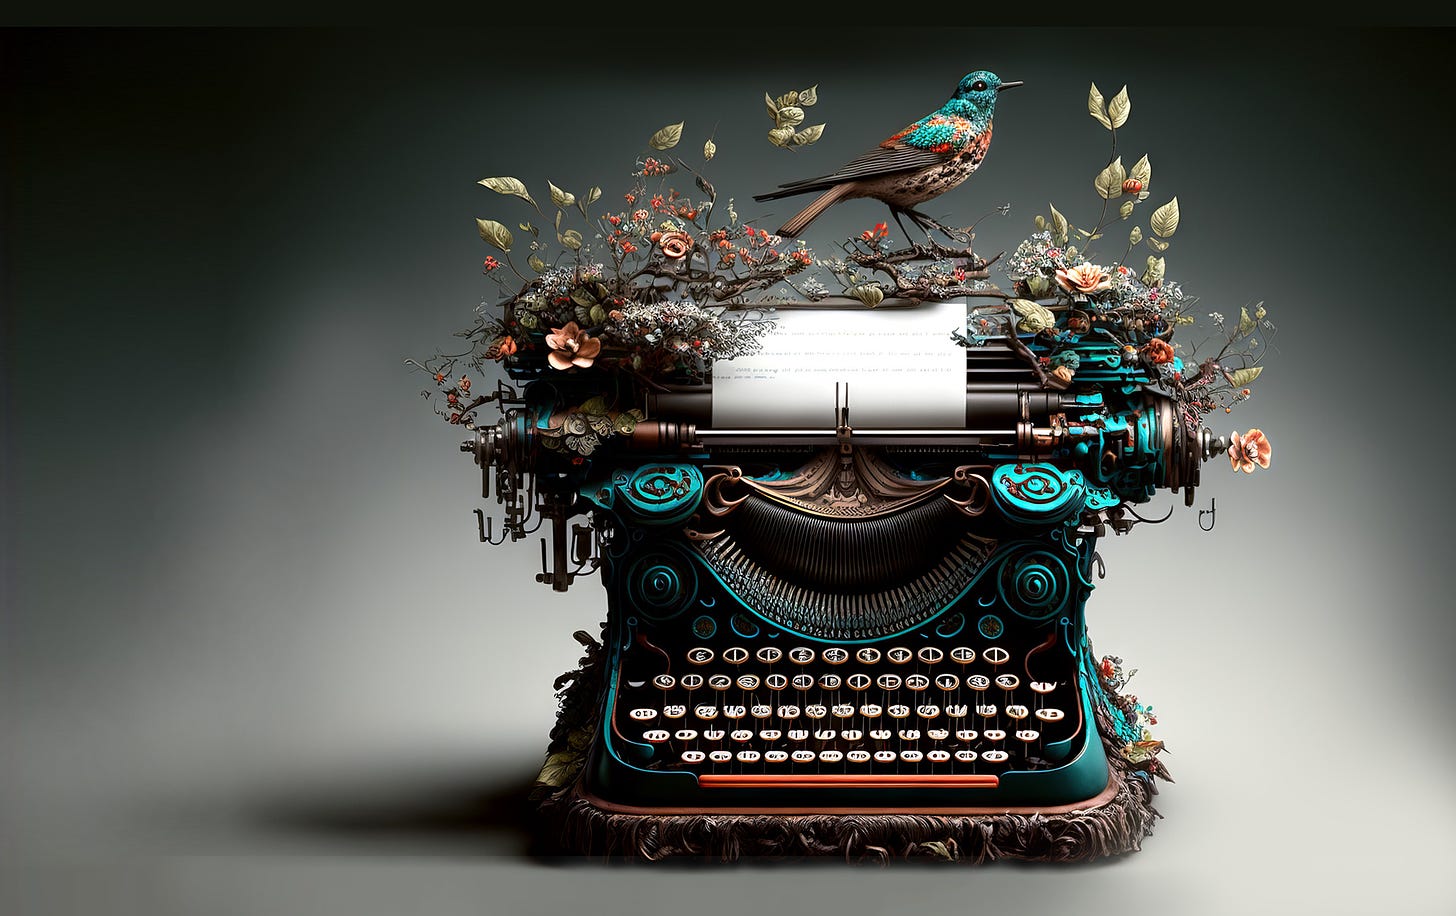 A vintage typewriter that has leaves and flowers growing from it. A delicate teal coloured bird sits atop it.